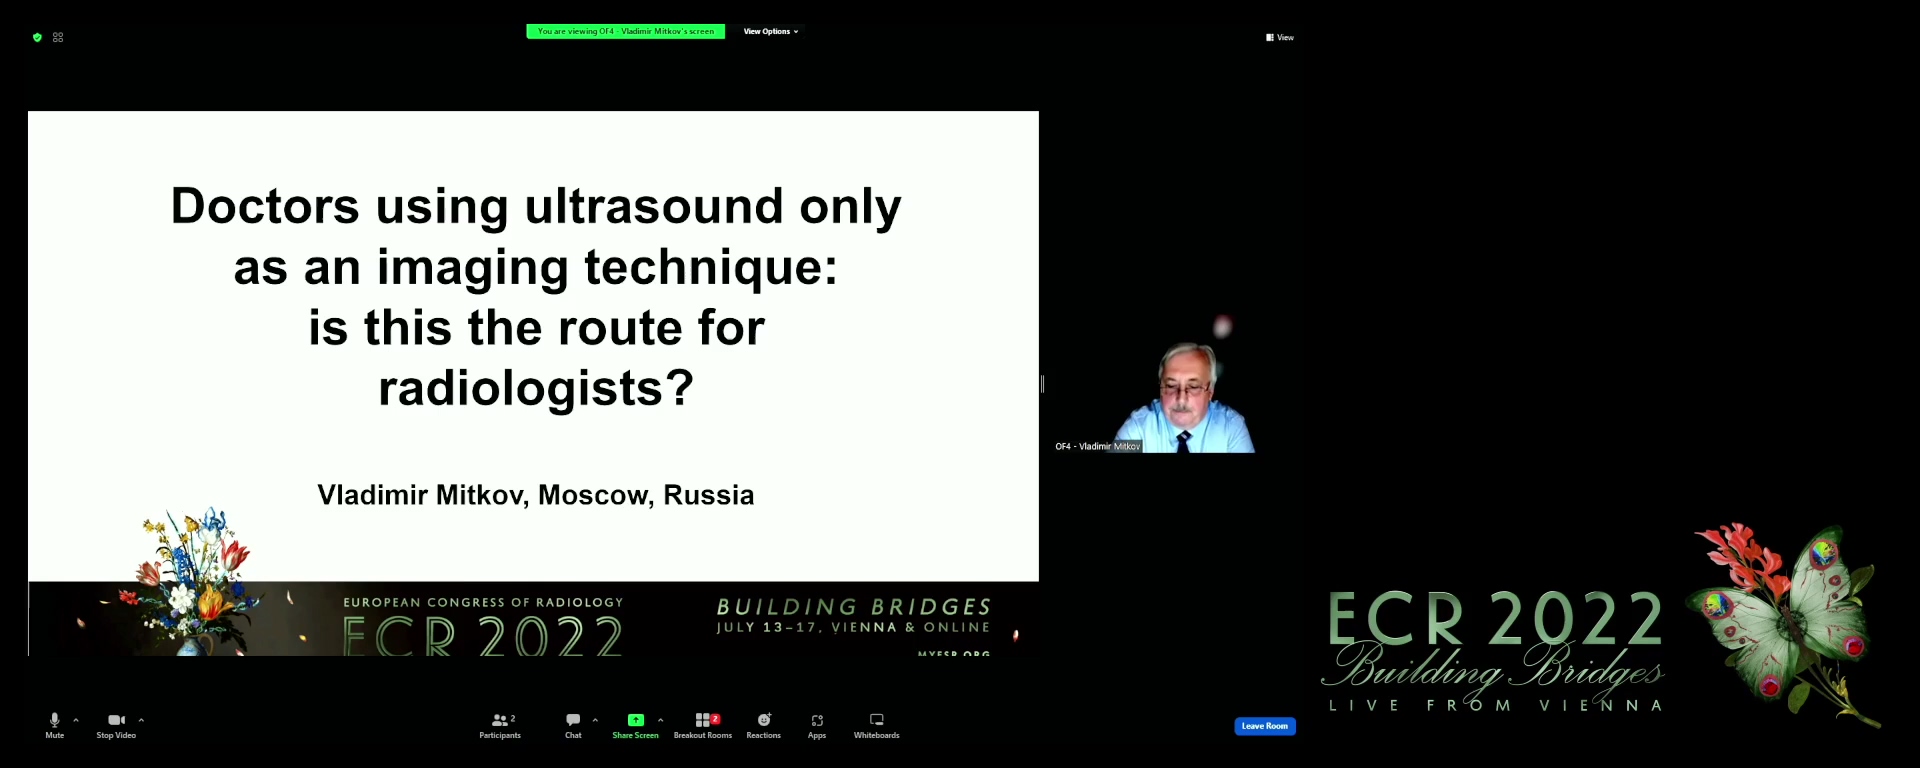 Doctors using ultrasound only as an imaging technique: is this the route for radiologists? - Vladimir Mitkov, Moscow / RU